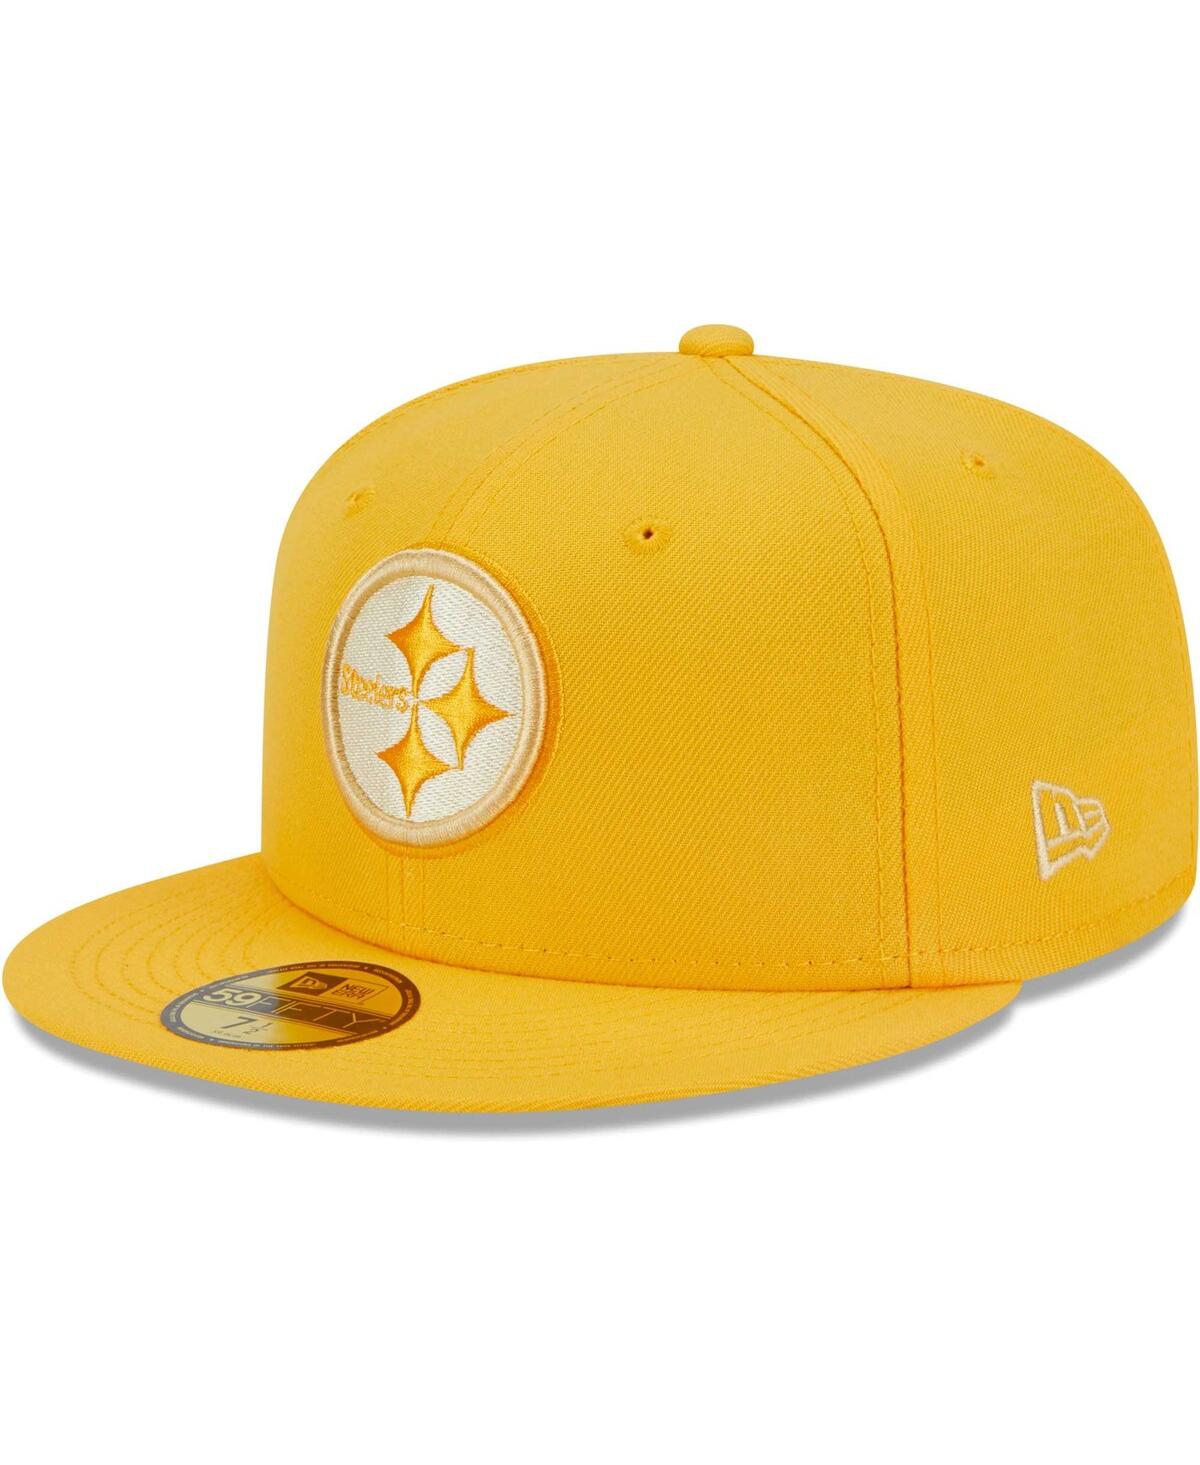 NEW ERA MEN'S NEW ERA GOLD PITTSBURGH STEELERS MONOCAMO 59FIFTY FITTED HAT